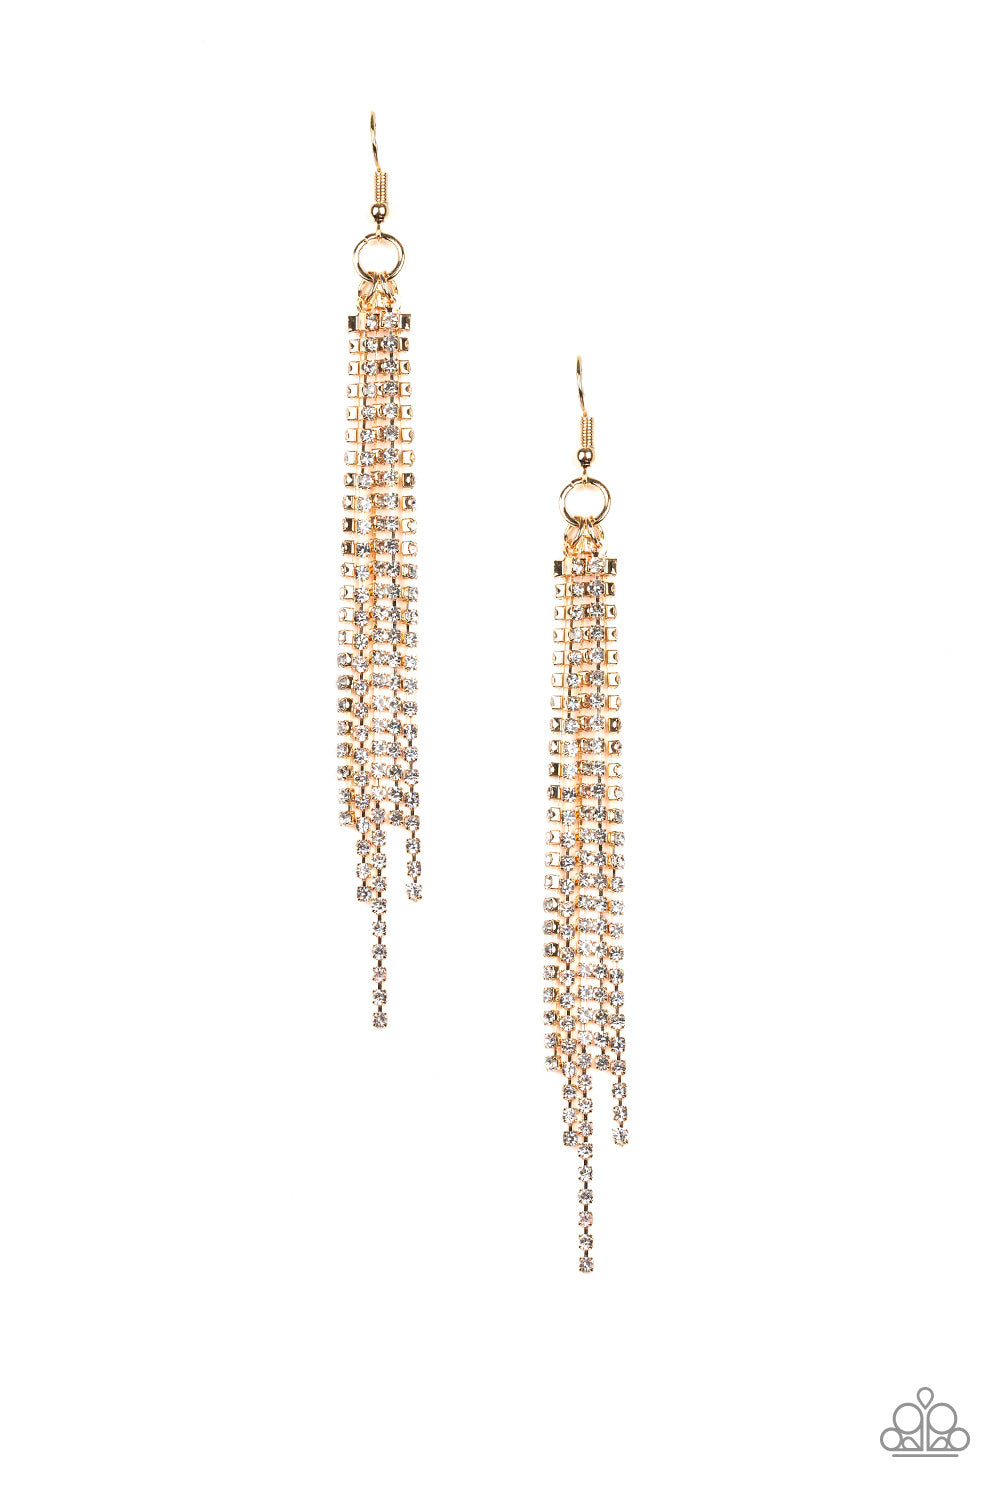 Center Stage Status - Gold Earrings Paparazzi Accessories